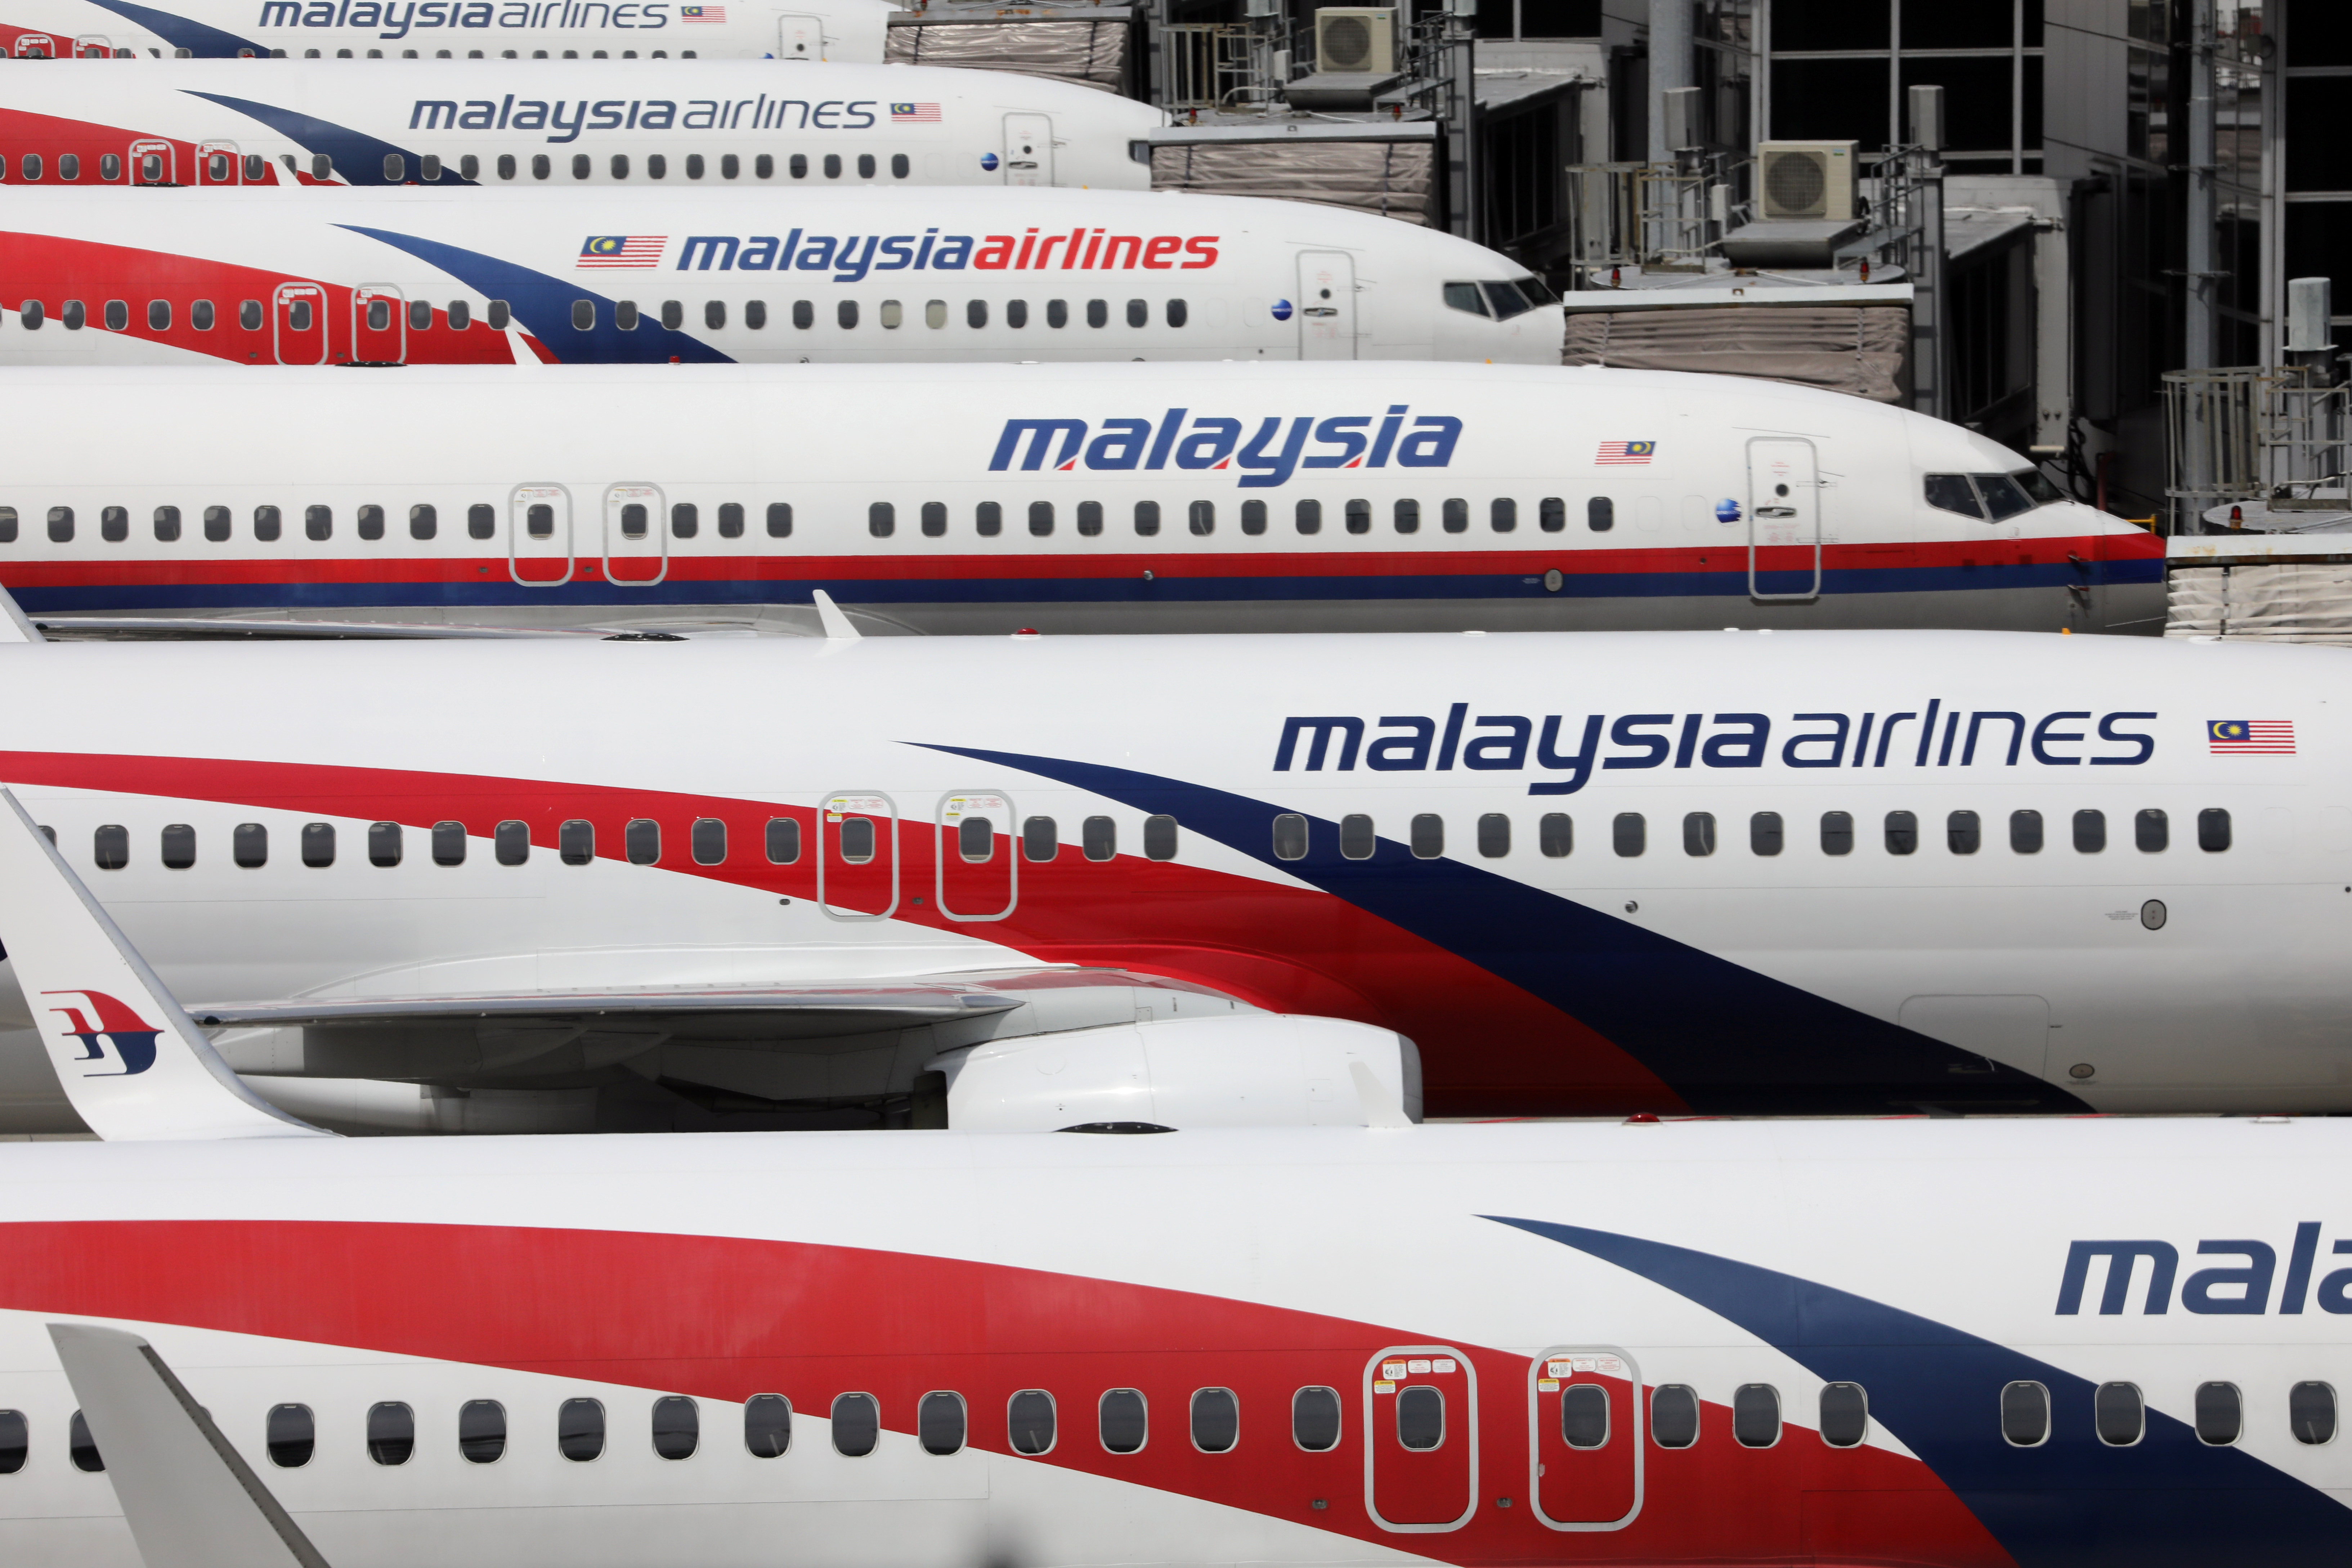 Malaysia Airlines planes are seen parked at Kuala Lumpur International Airport, amid the coronavirus disease (COVID-19) outbreak in Sepang